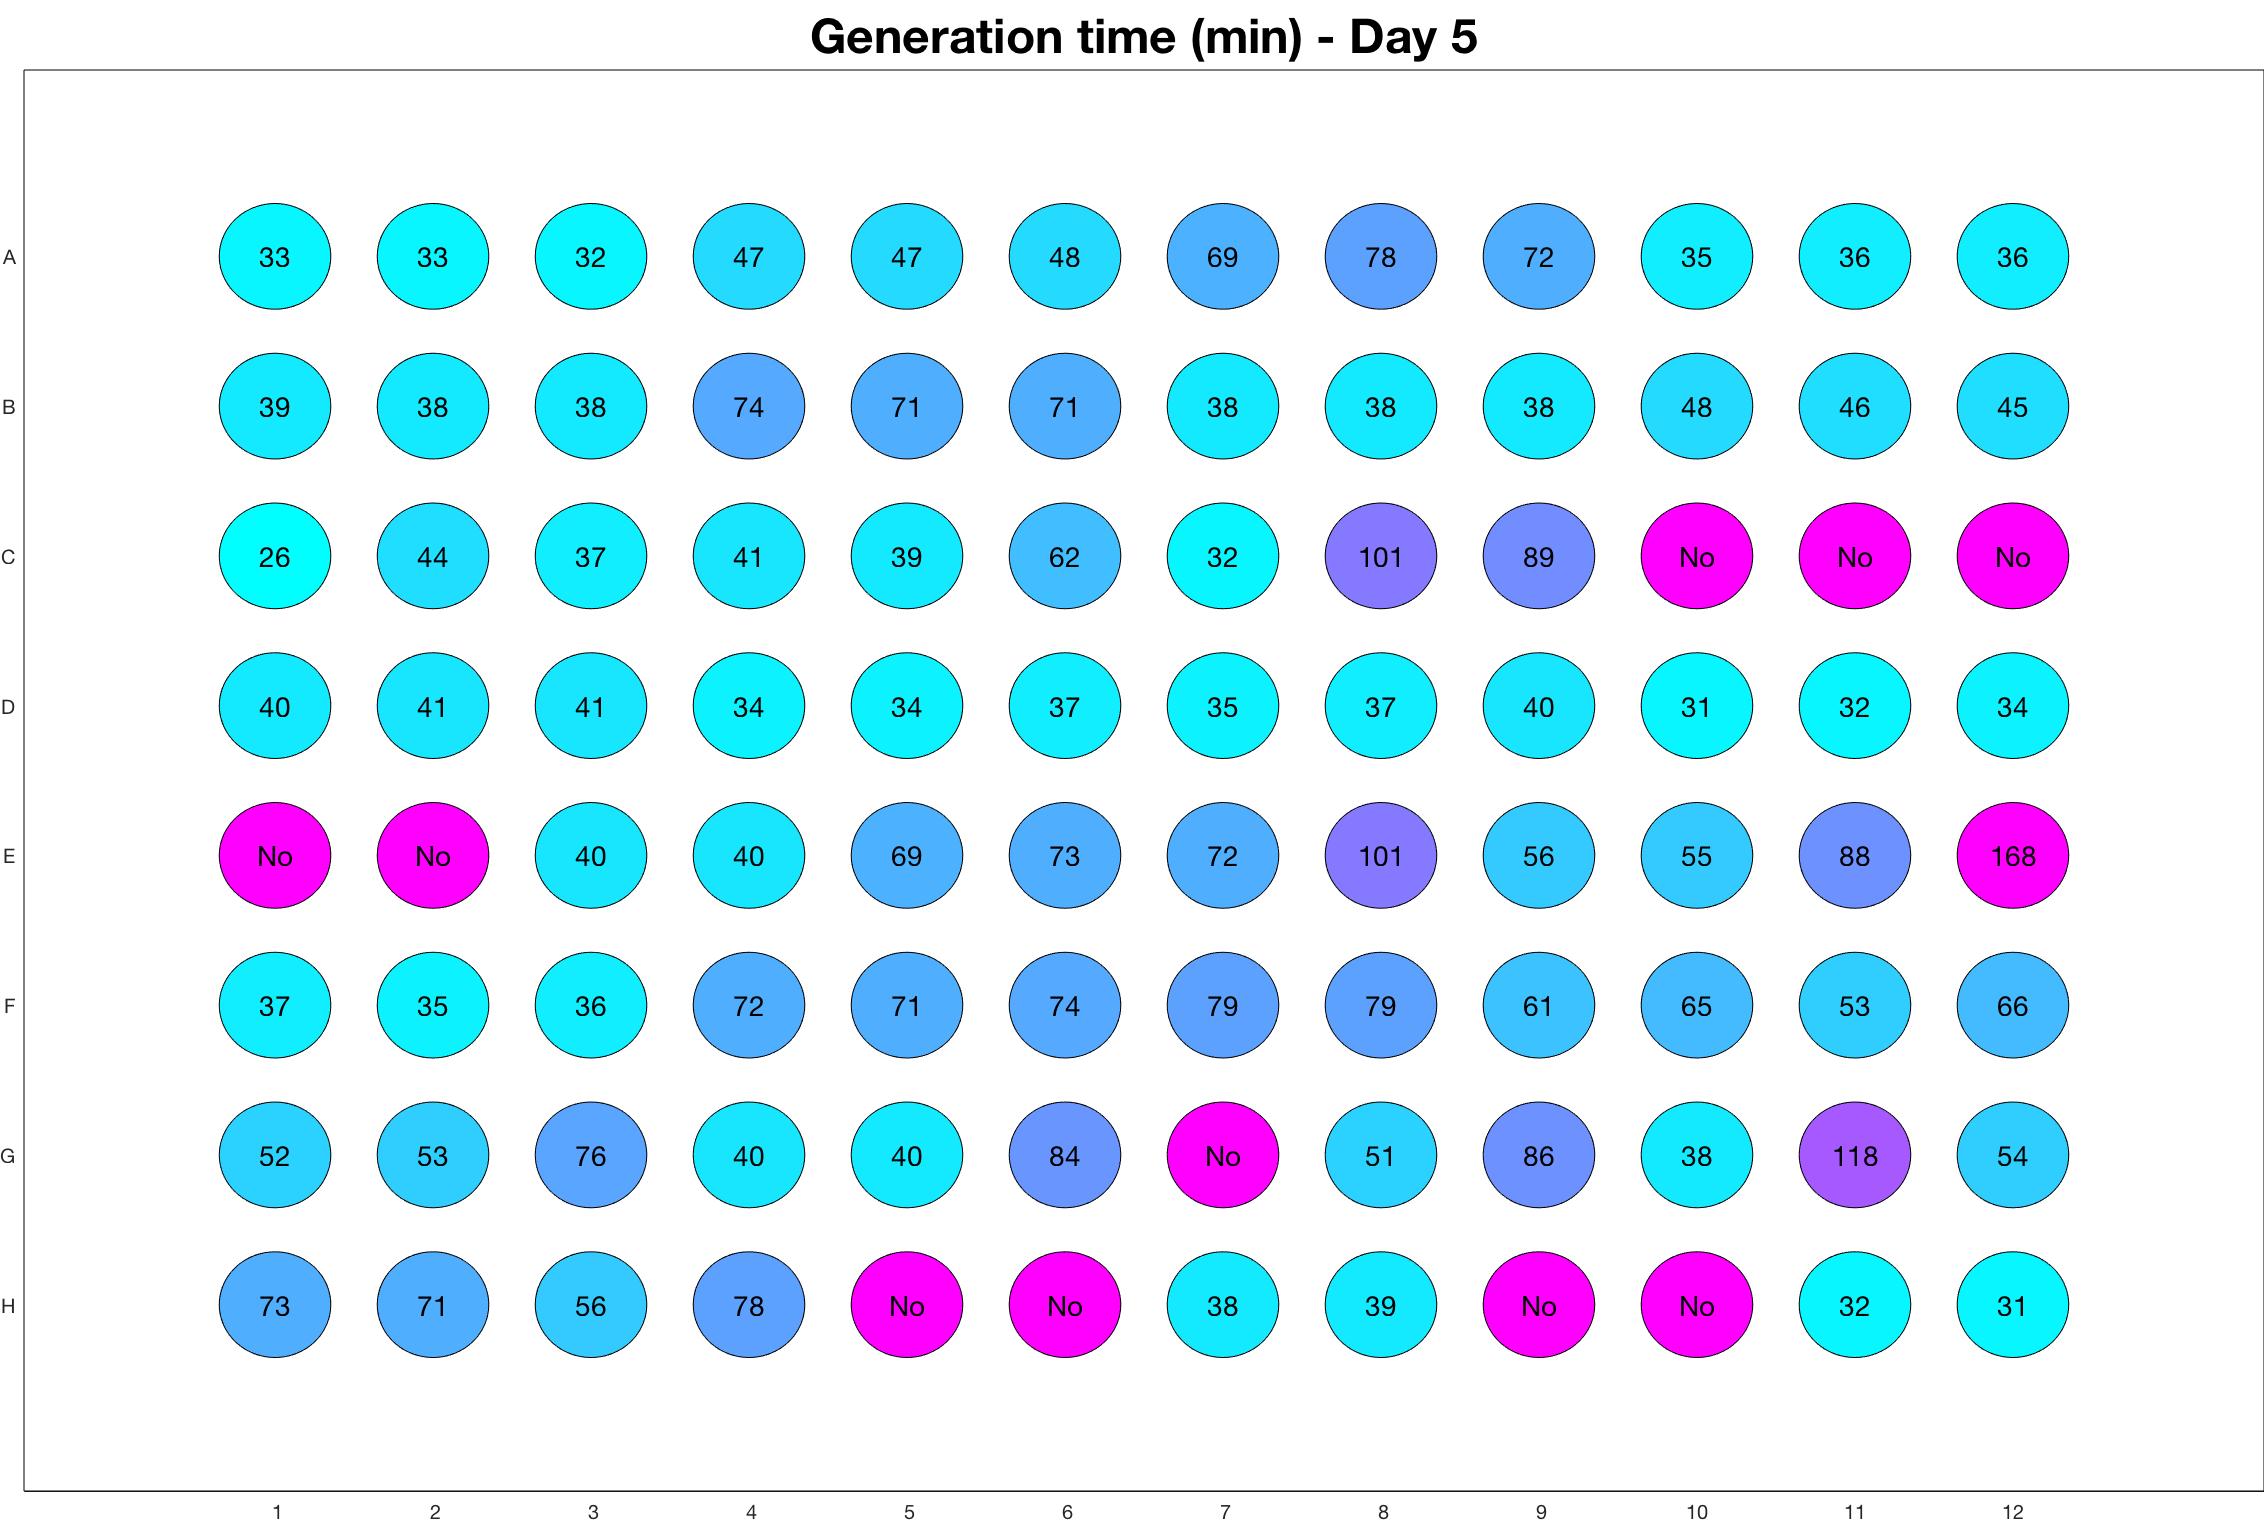 Generation time for day - 5.jpg